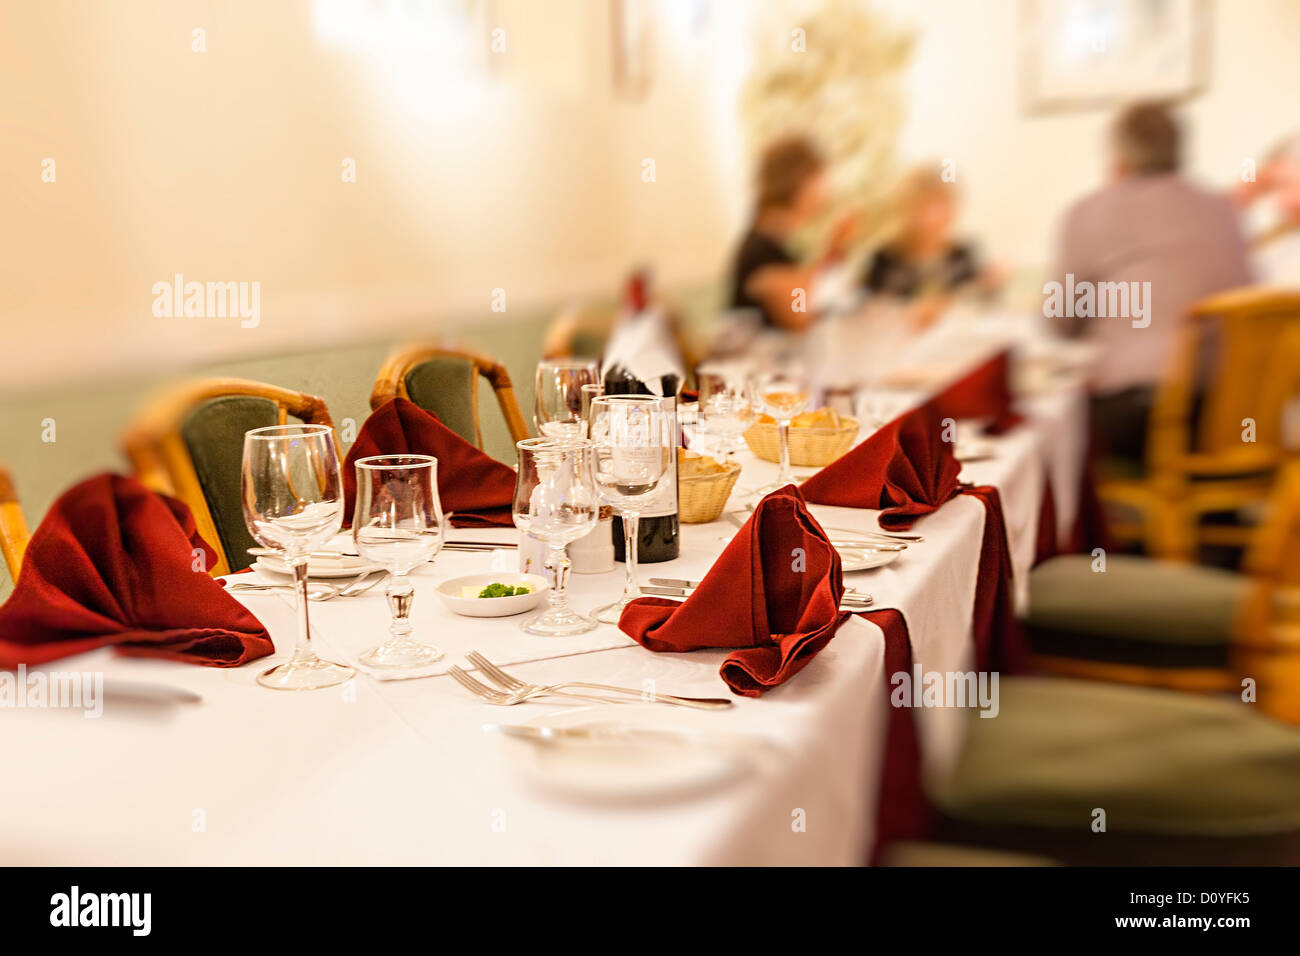 People in restaurant with focus on table with places laid ready, UK Stock Photo